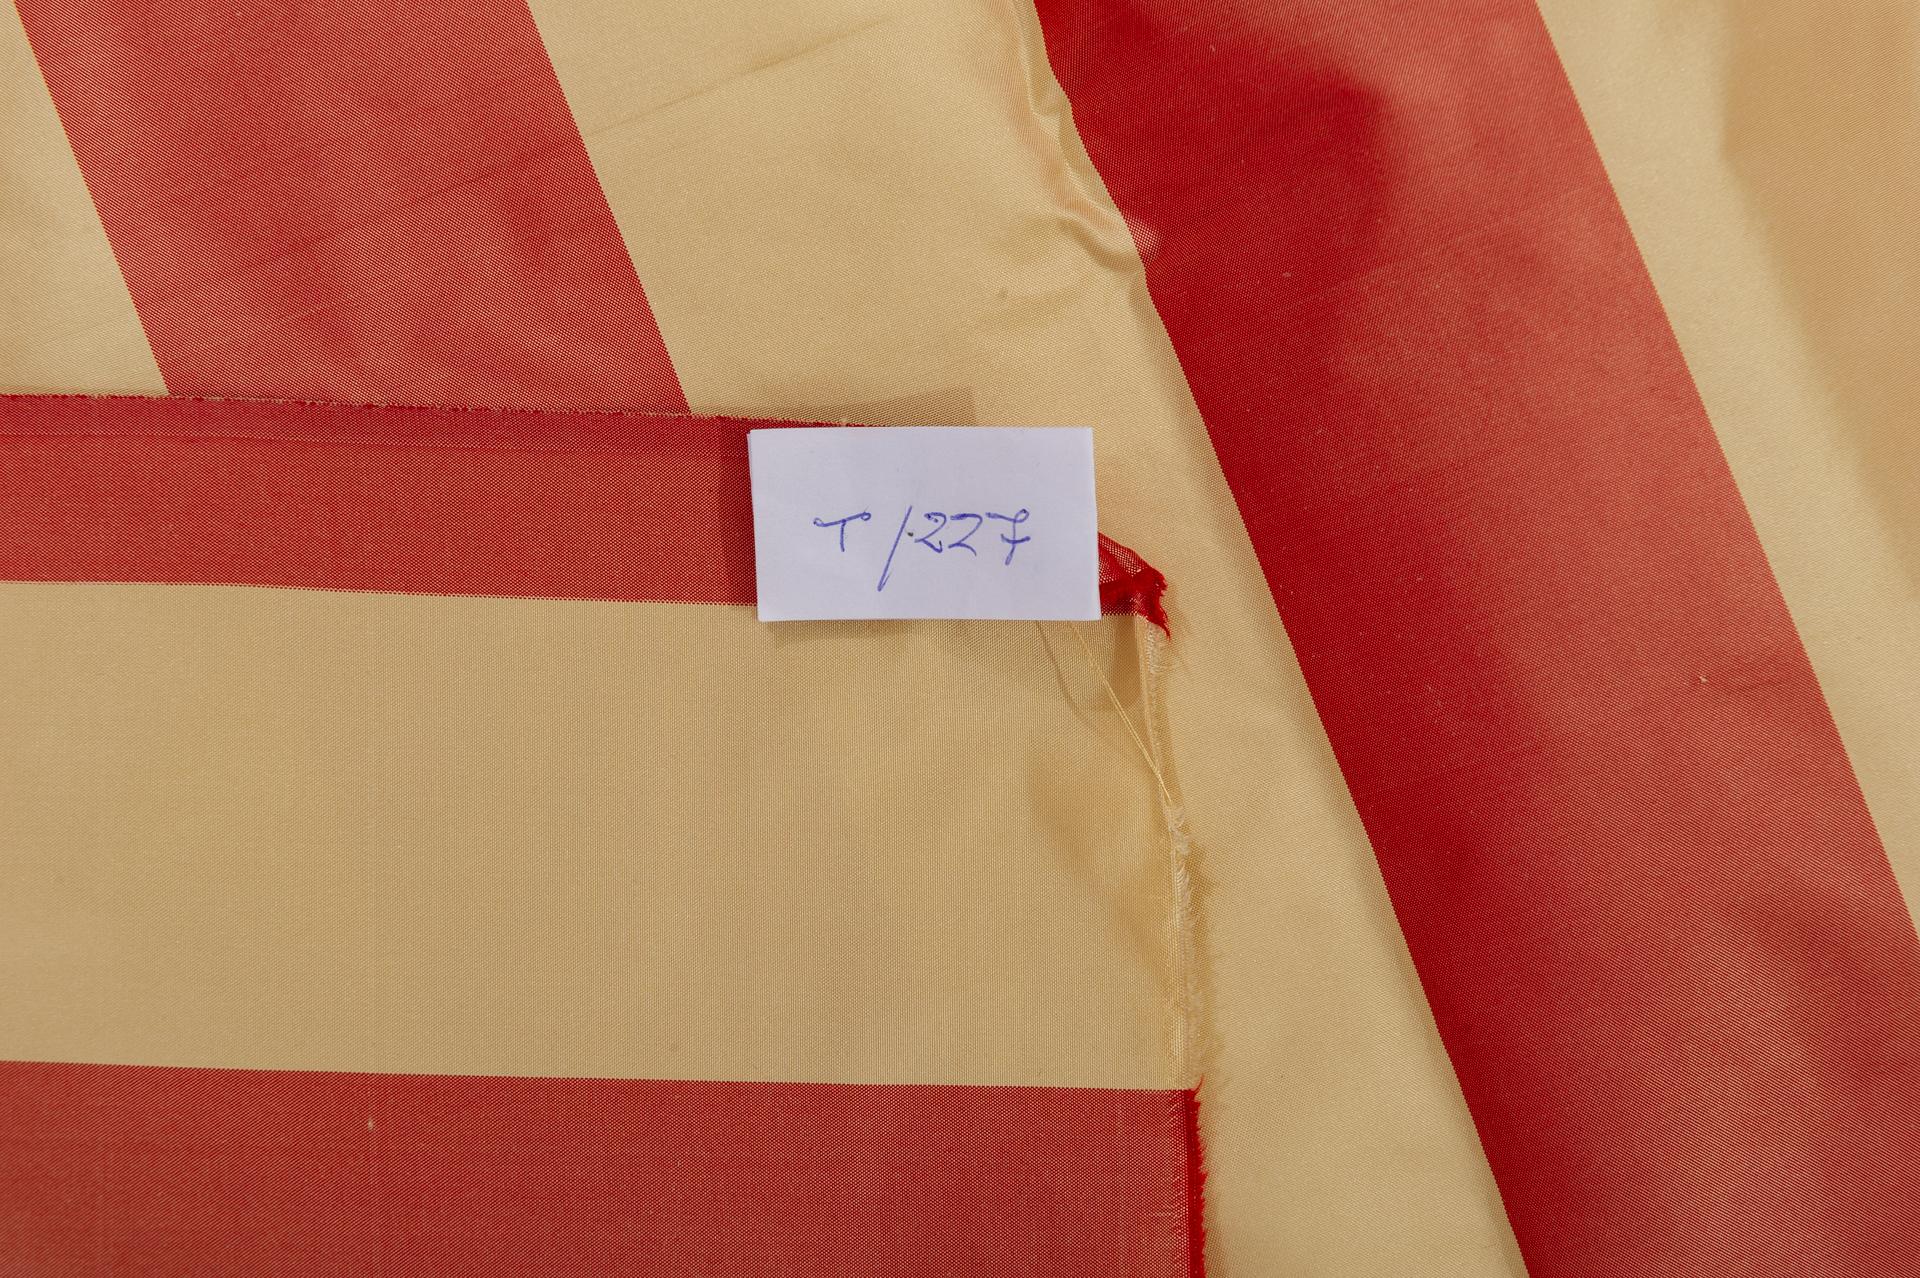 Beige and red stripes for this splendid Italian silk: C & C, one of the most famous fabric companies.
It can be placed or draped over another curtain.